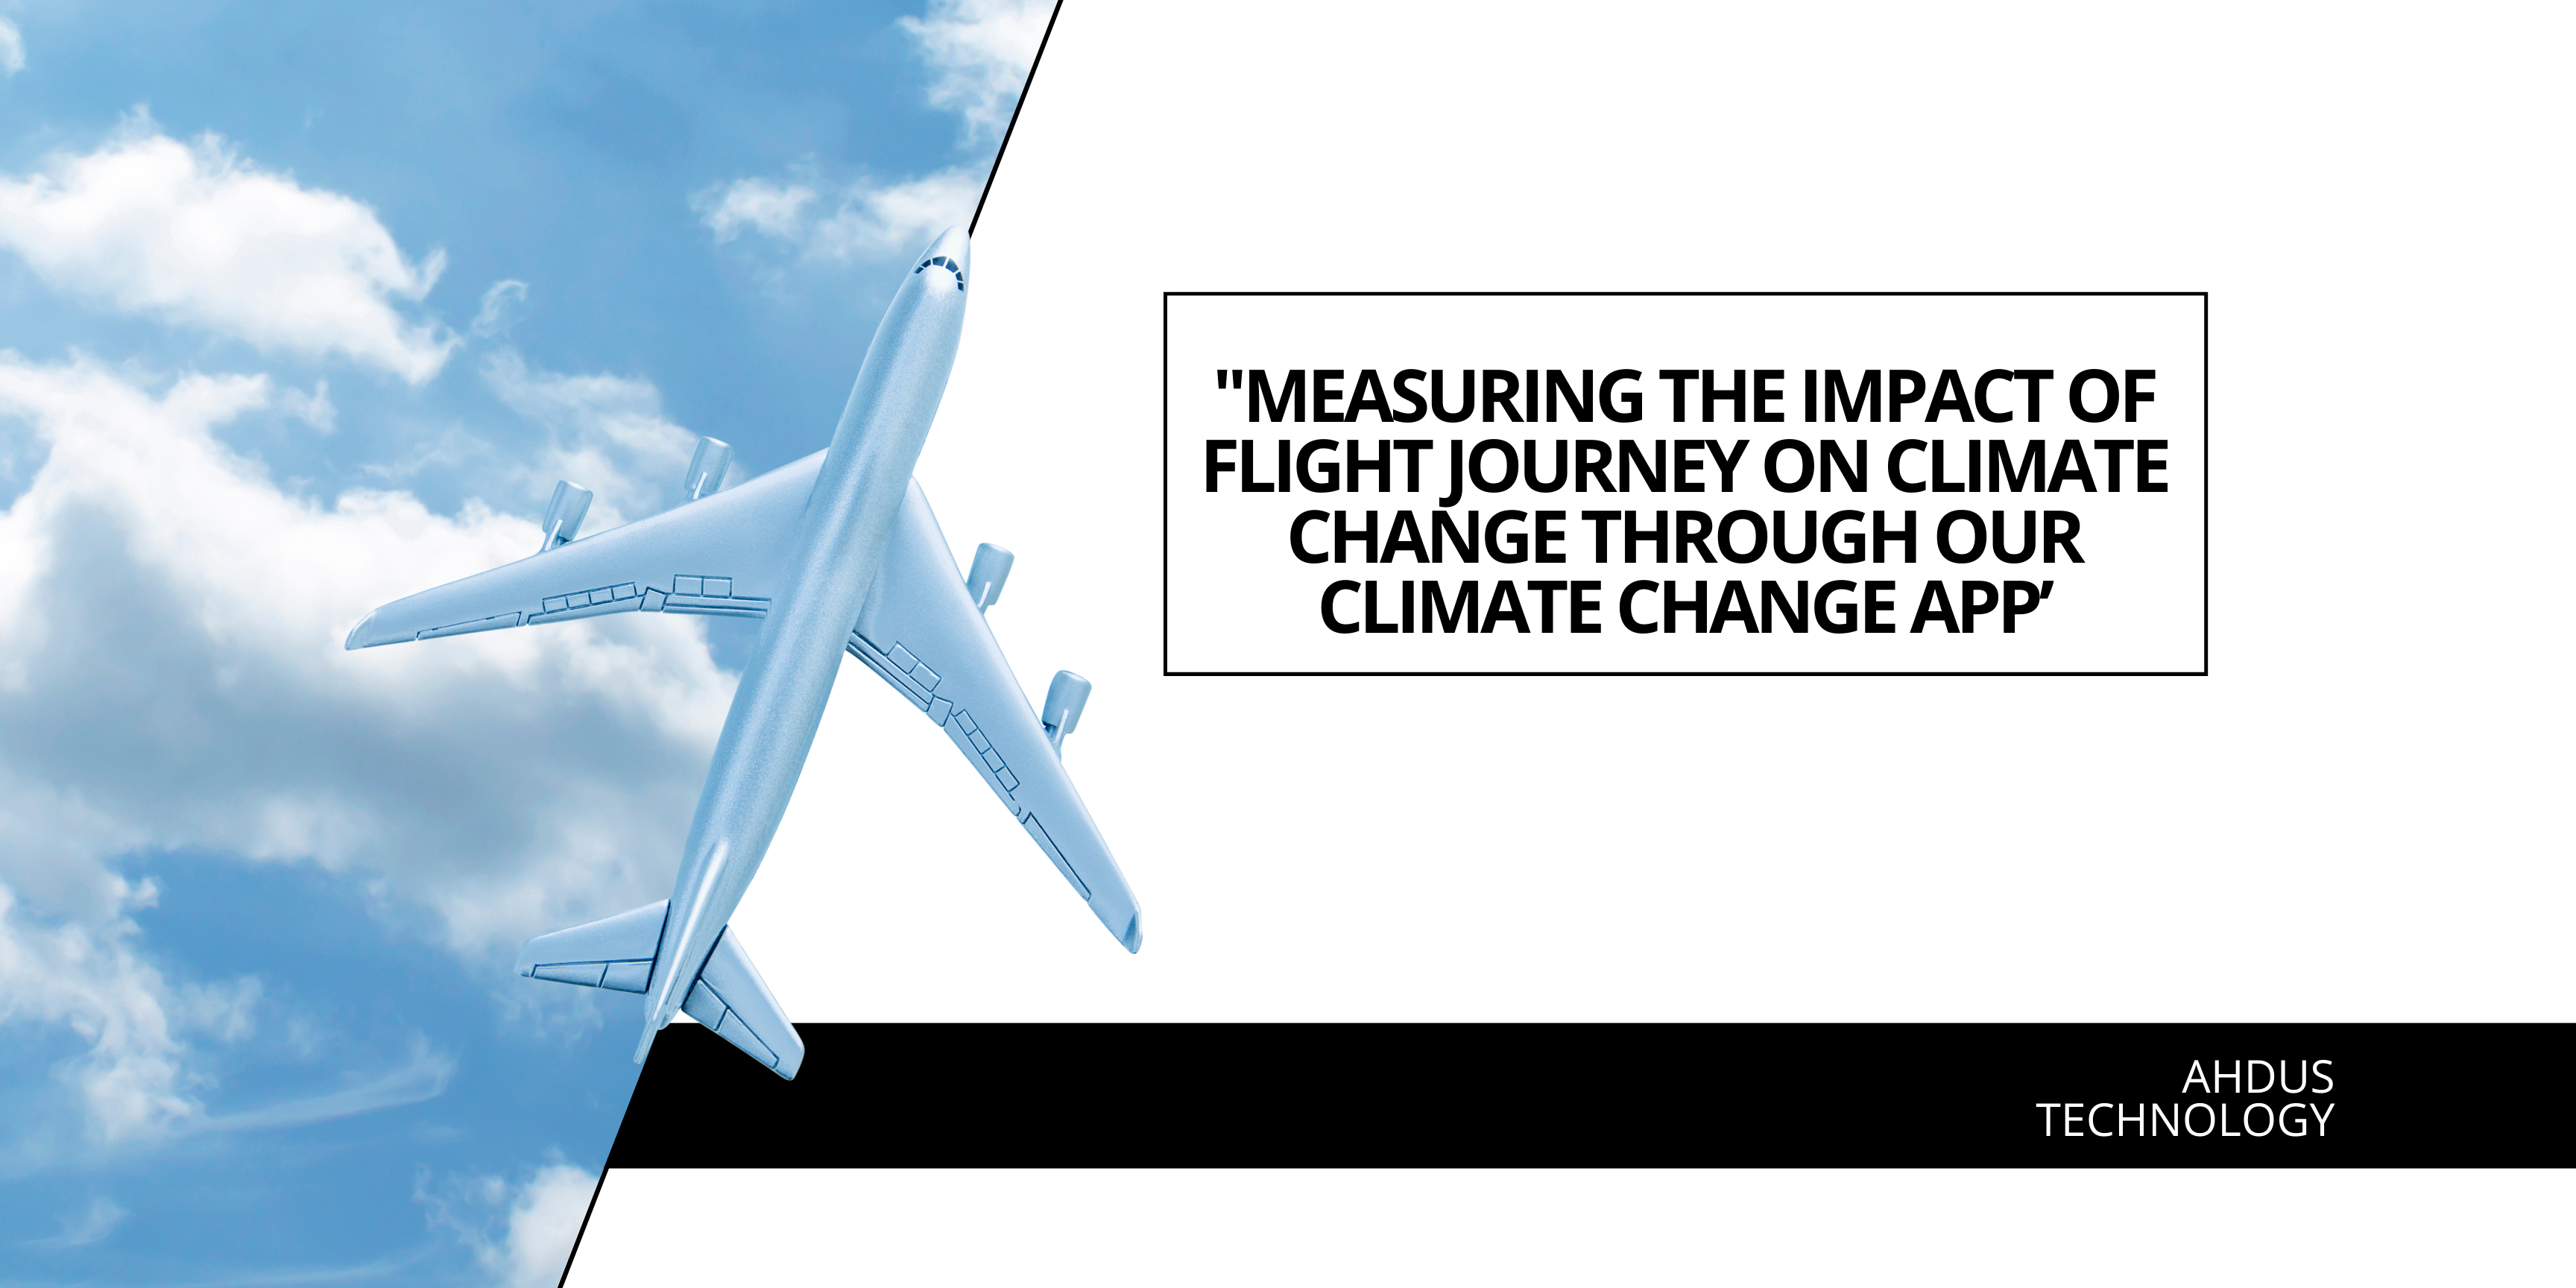 “Measuring the Impact of Flight Journey on Climate Change through our Climate Change App’